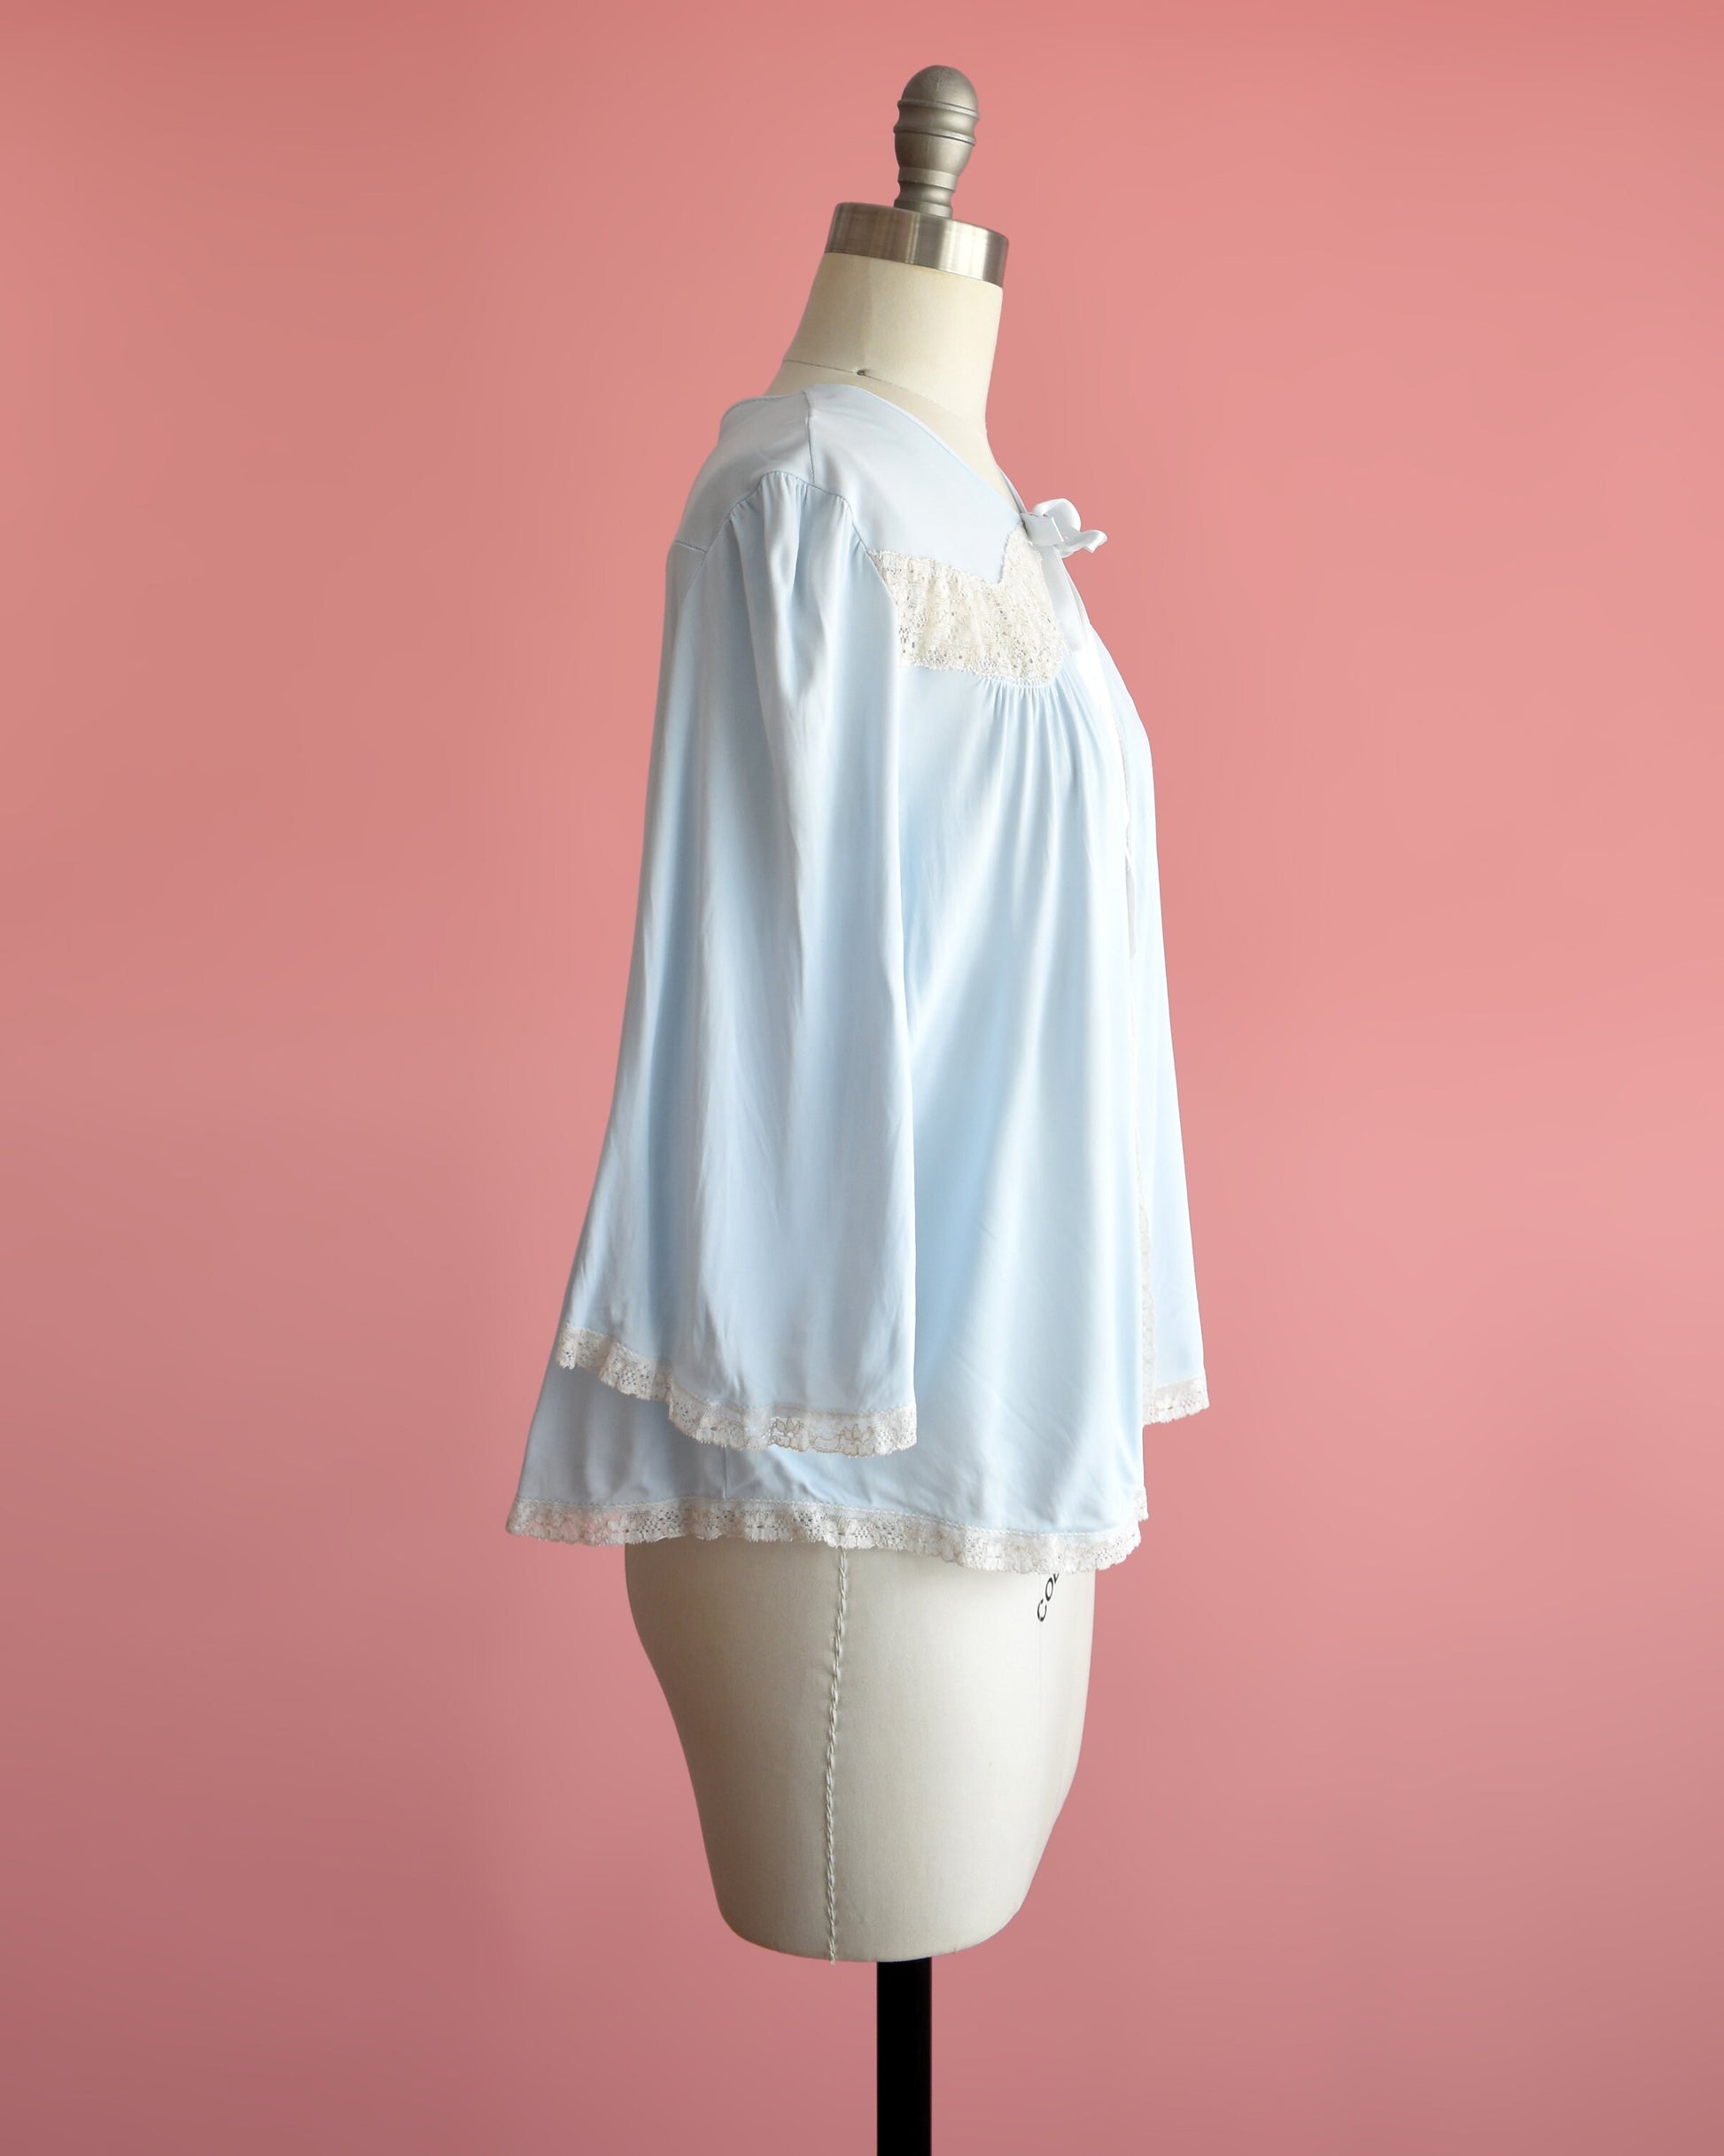 Side view of a vintage 60s light blue bed jacket with cream lace trim around the front, down the front, around the hem, and cuffs. A ribbon tie is at the center of the collar. The garment is modeled on a dress form.